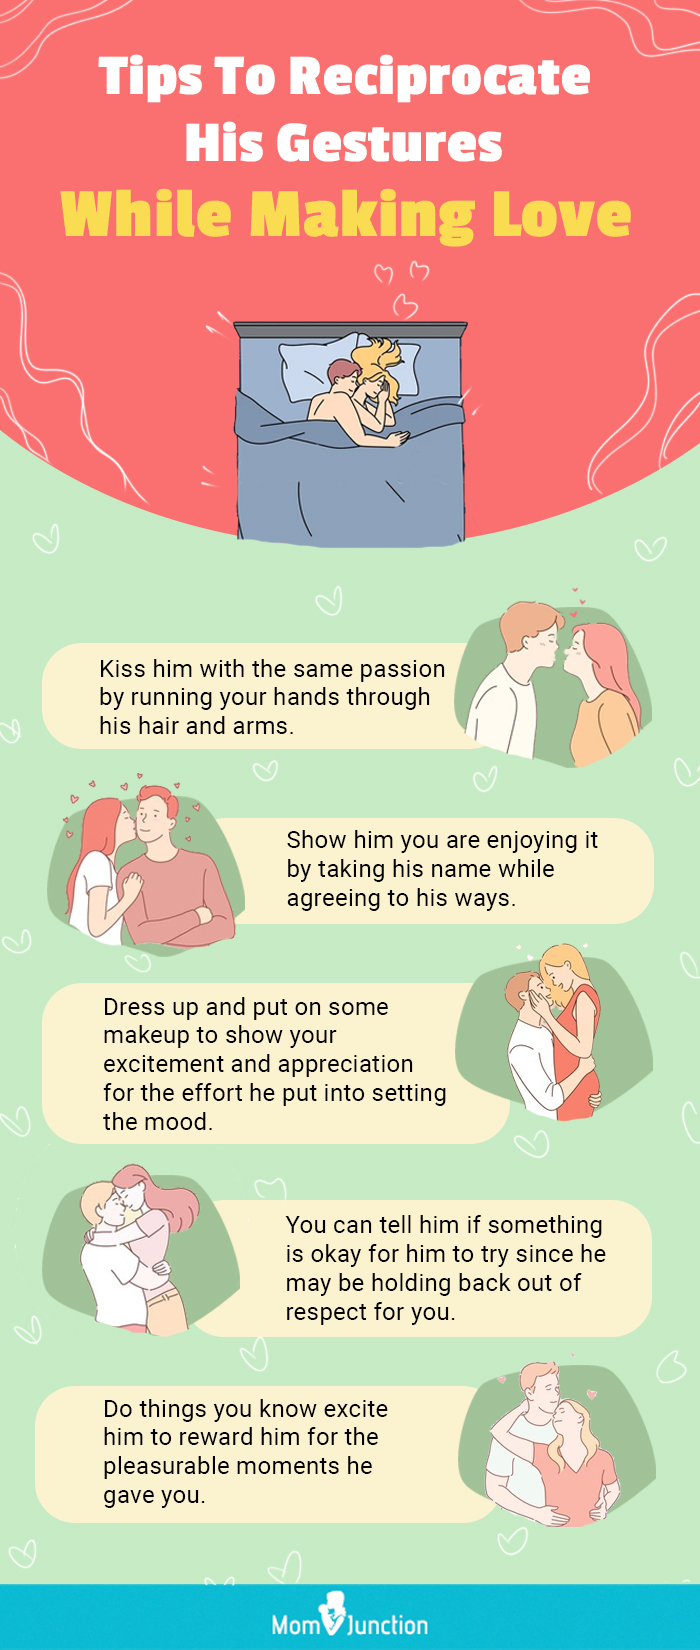 tips to reciprocate his gestures while making love (infographic)